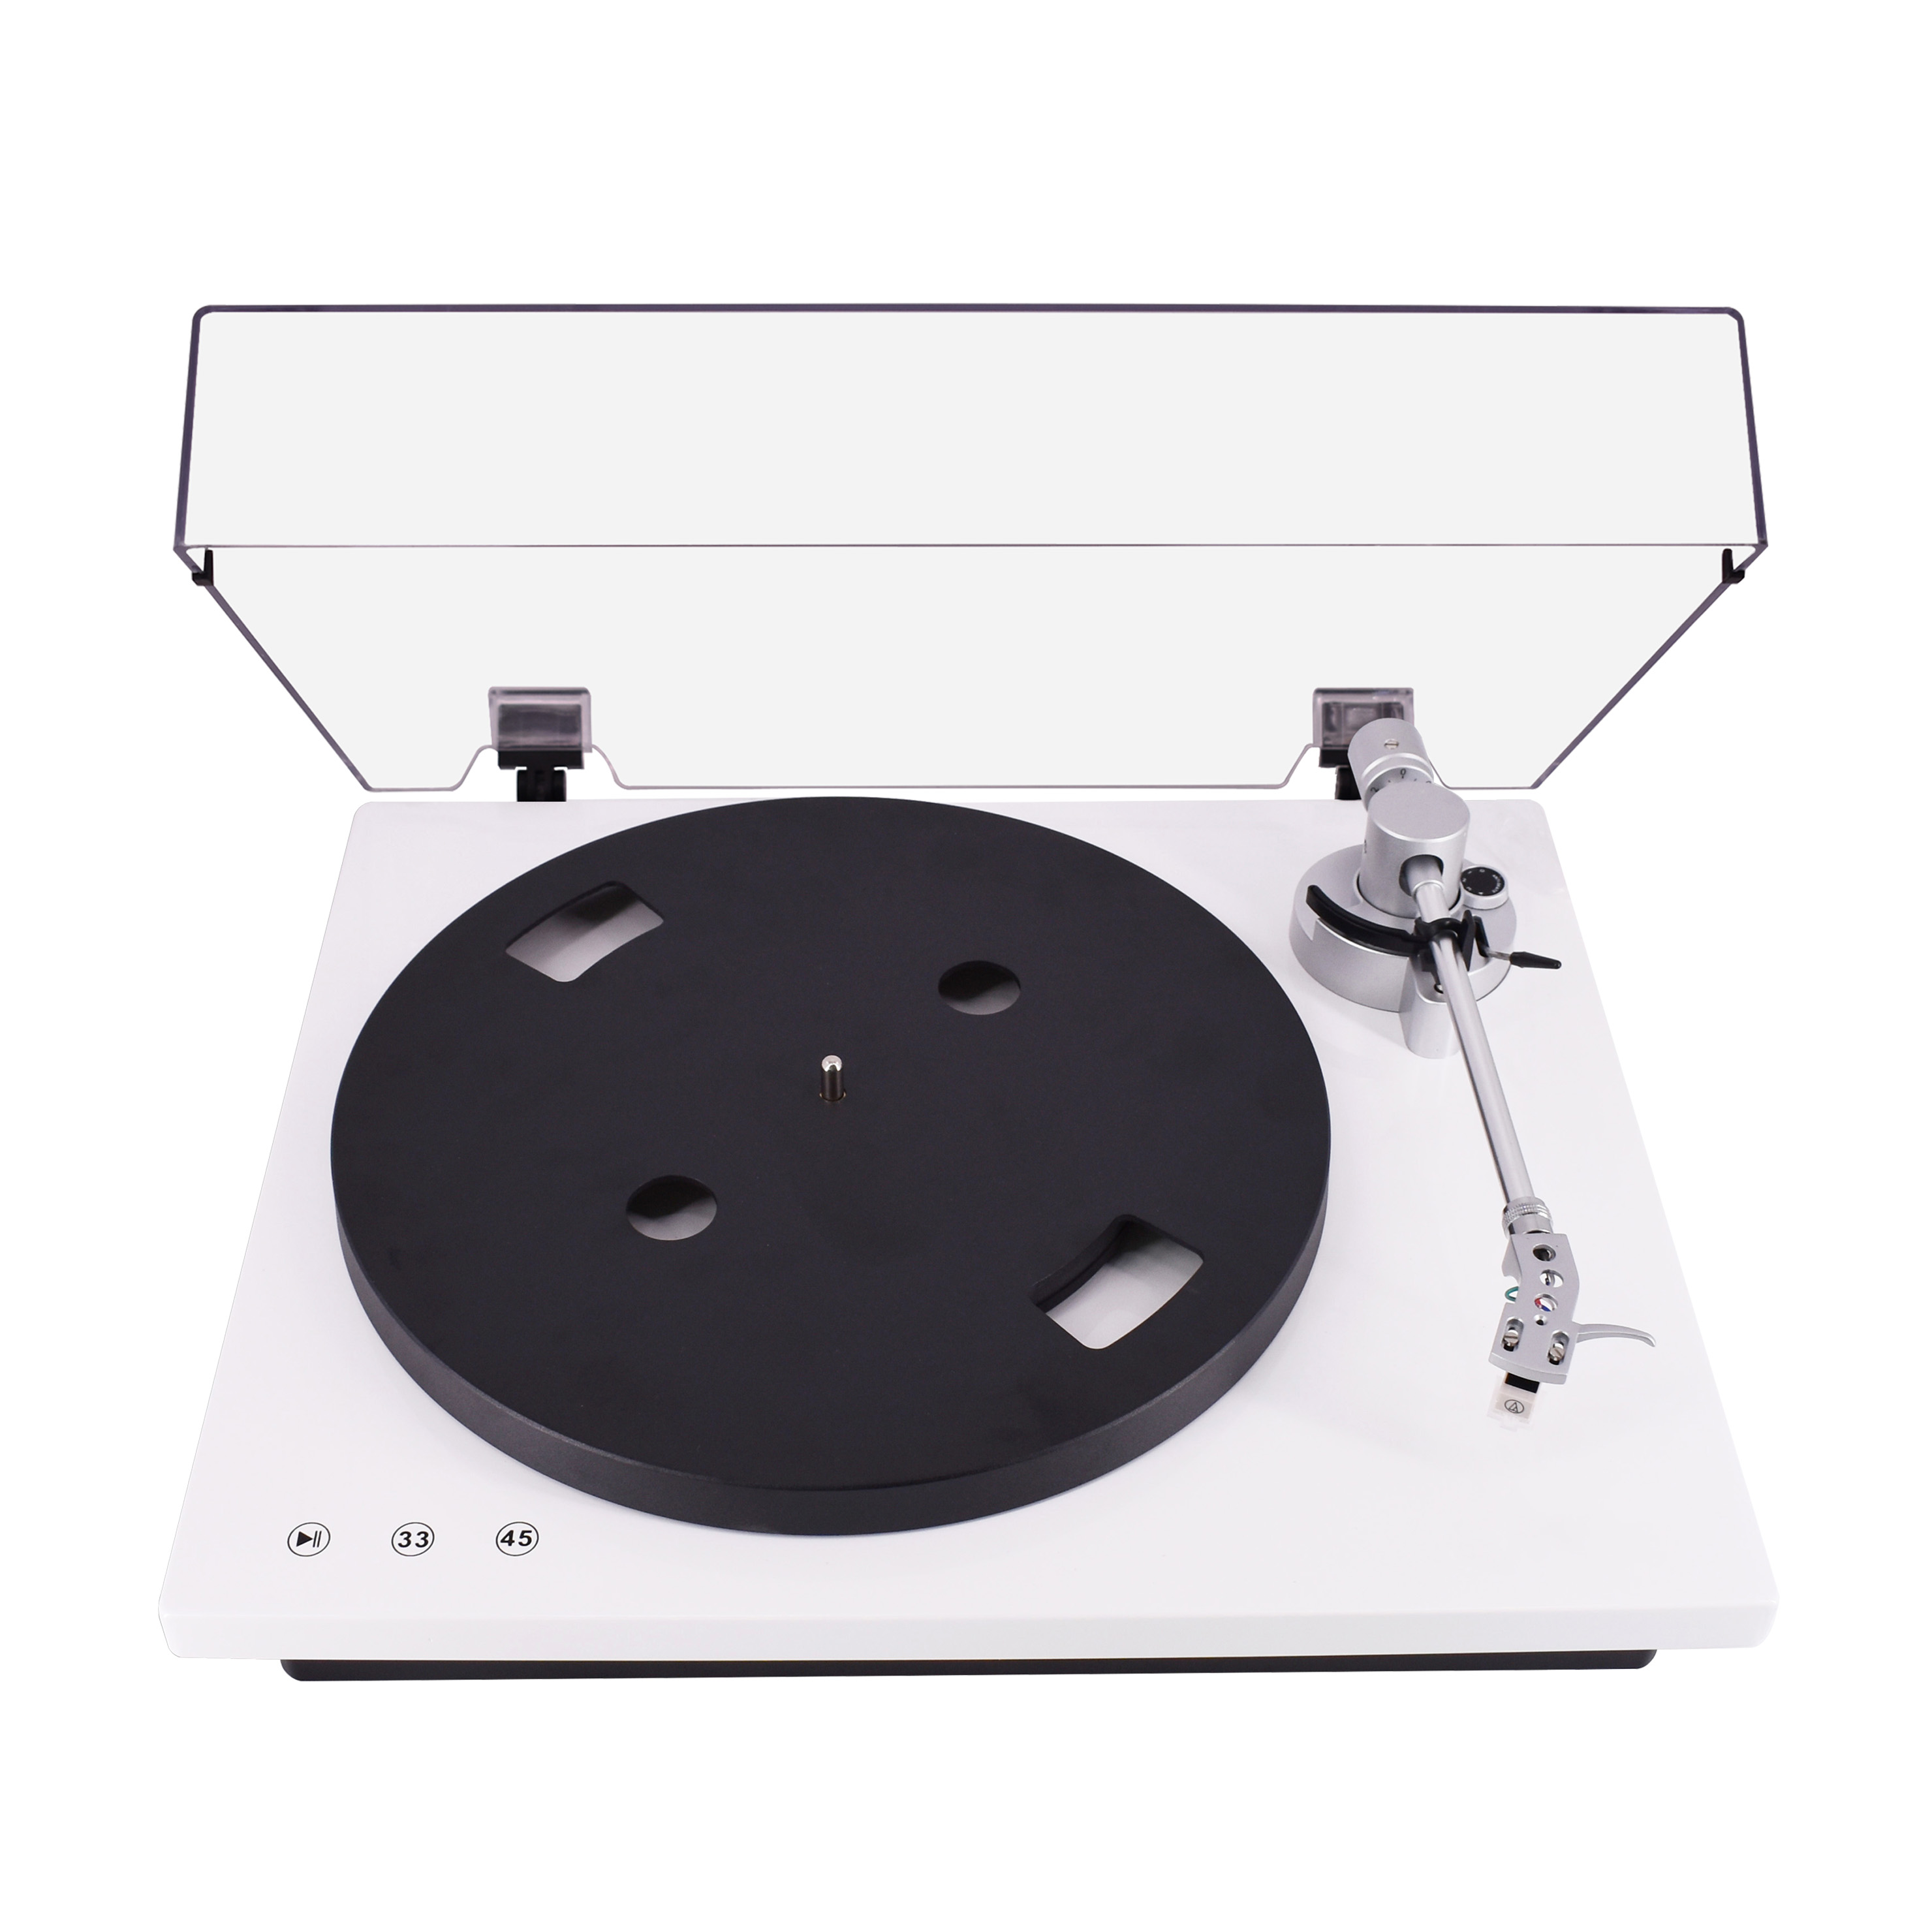 HIFI turntable with direct drive 